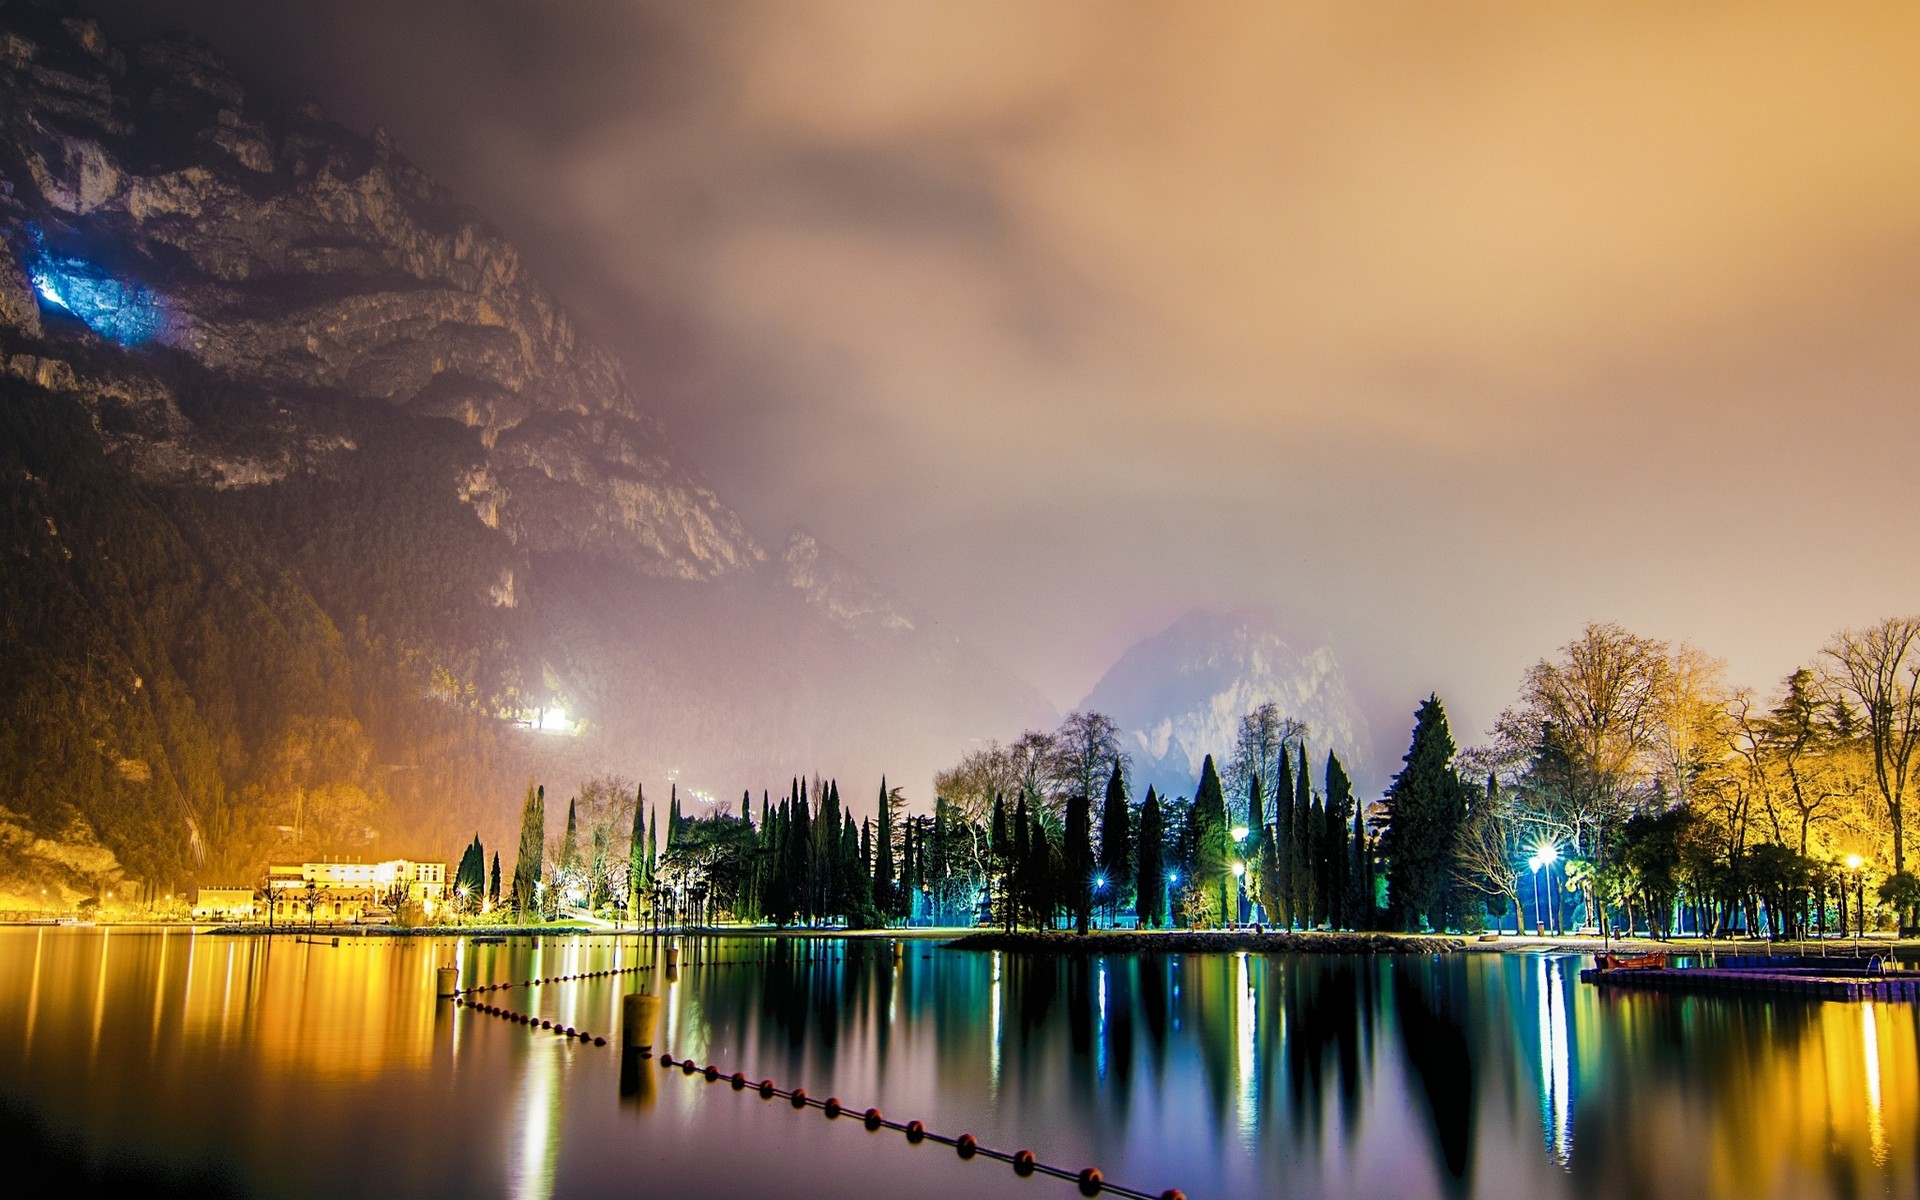 General 1920x1200 landscape nature city lights mist mountains lake Italy reflection night trees water